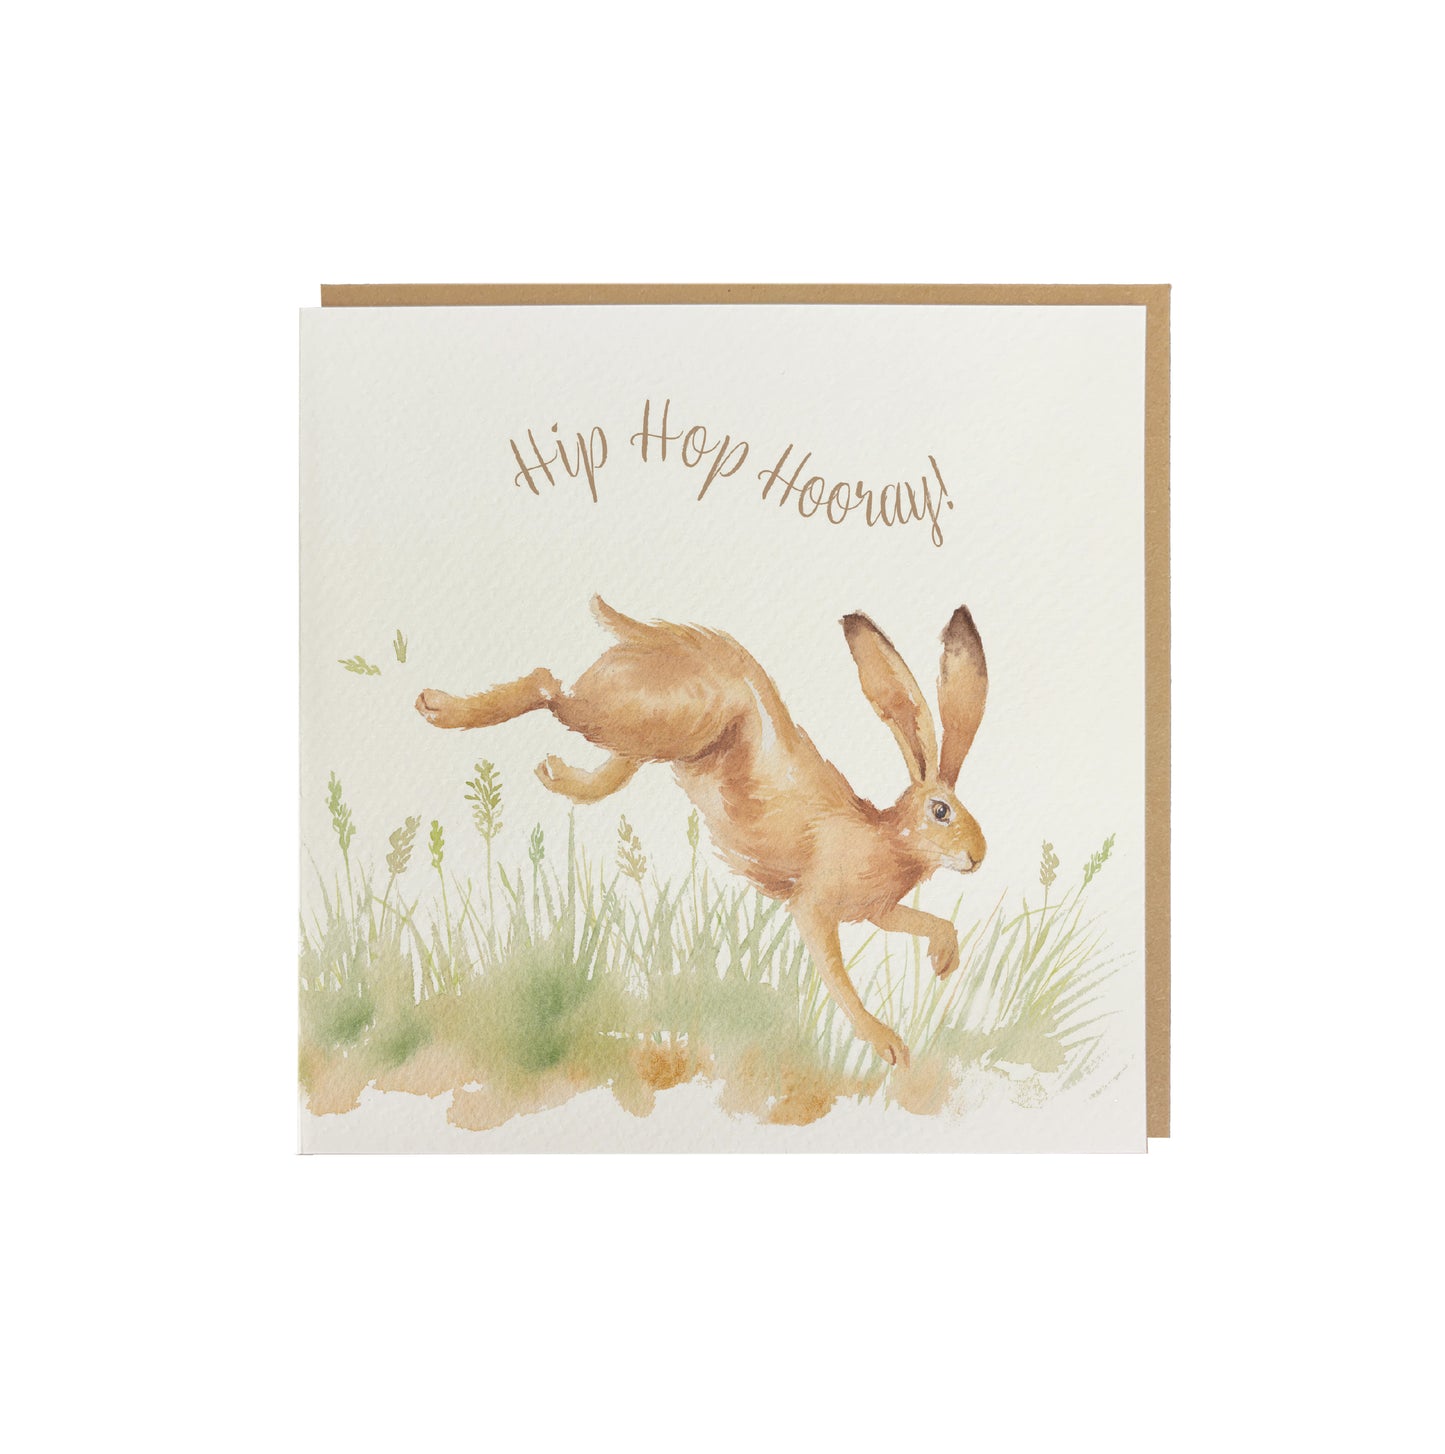 A greetings card reading Hip Hop Hooray in brown text above a leaping hare in a watercolour style. The card has a recyclable brown kraft envelope behind it.